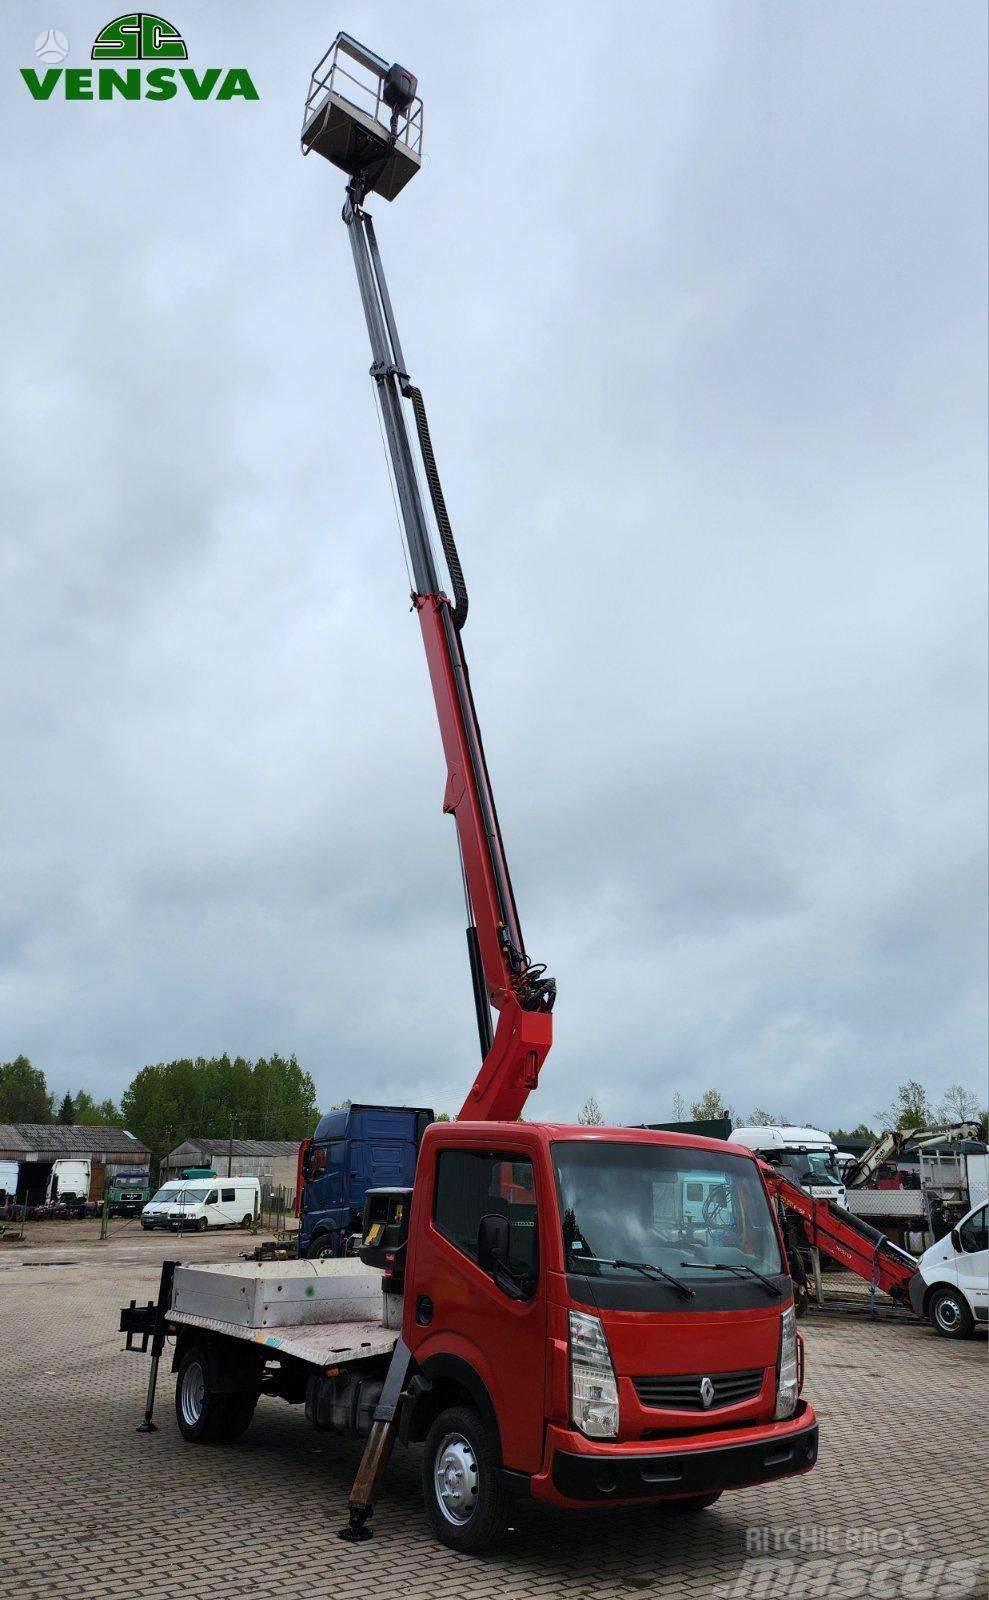 Renault Maxity 130.35 17m. Height boom Anders